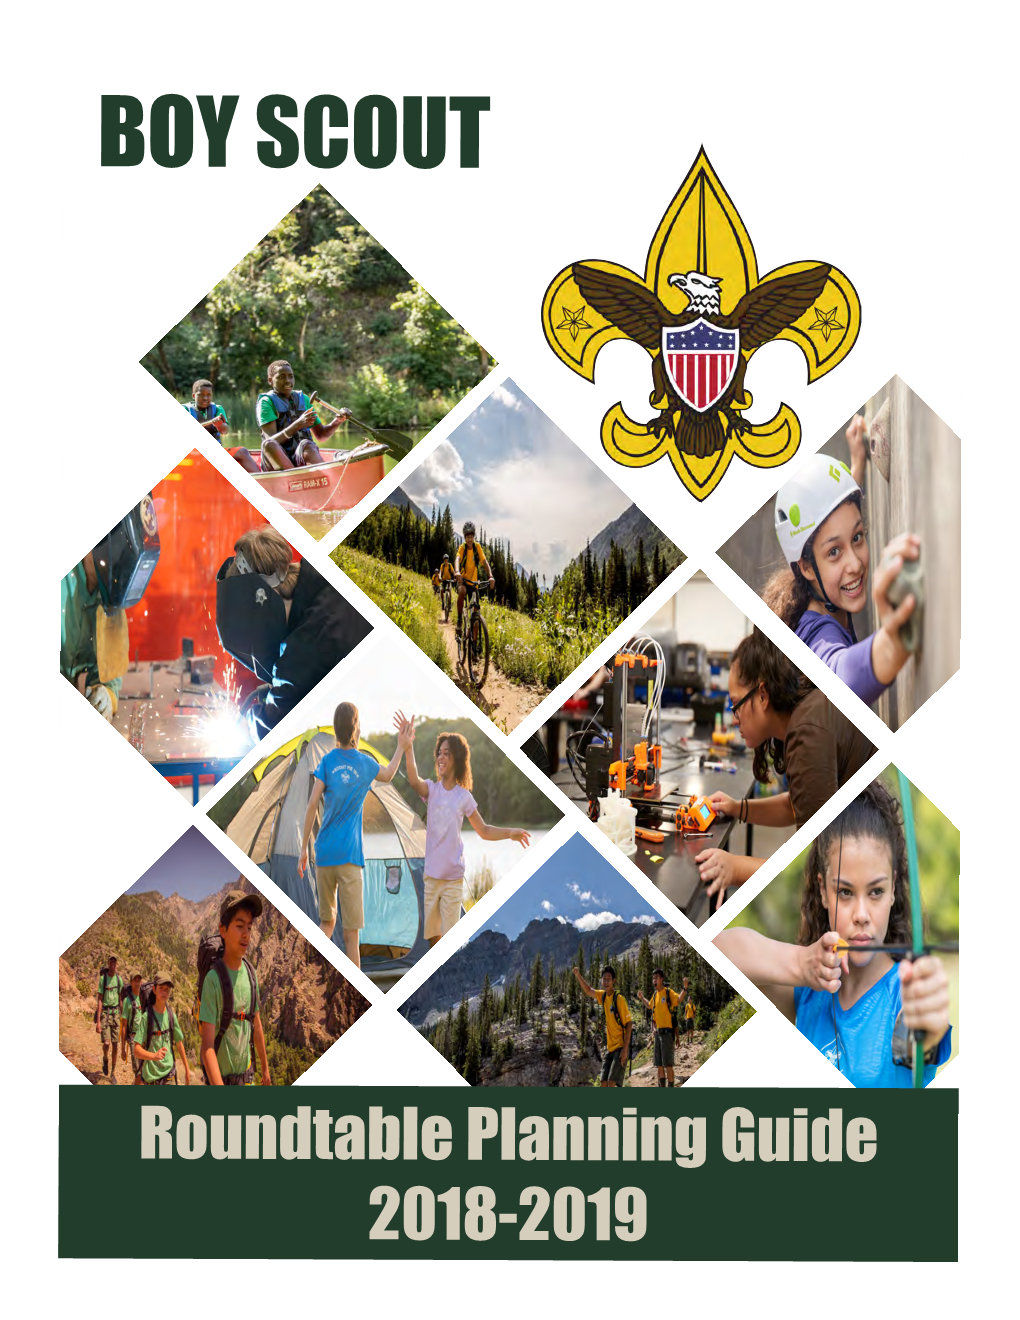 2018-2019 Boy Scout Roundtable Planning Guide